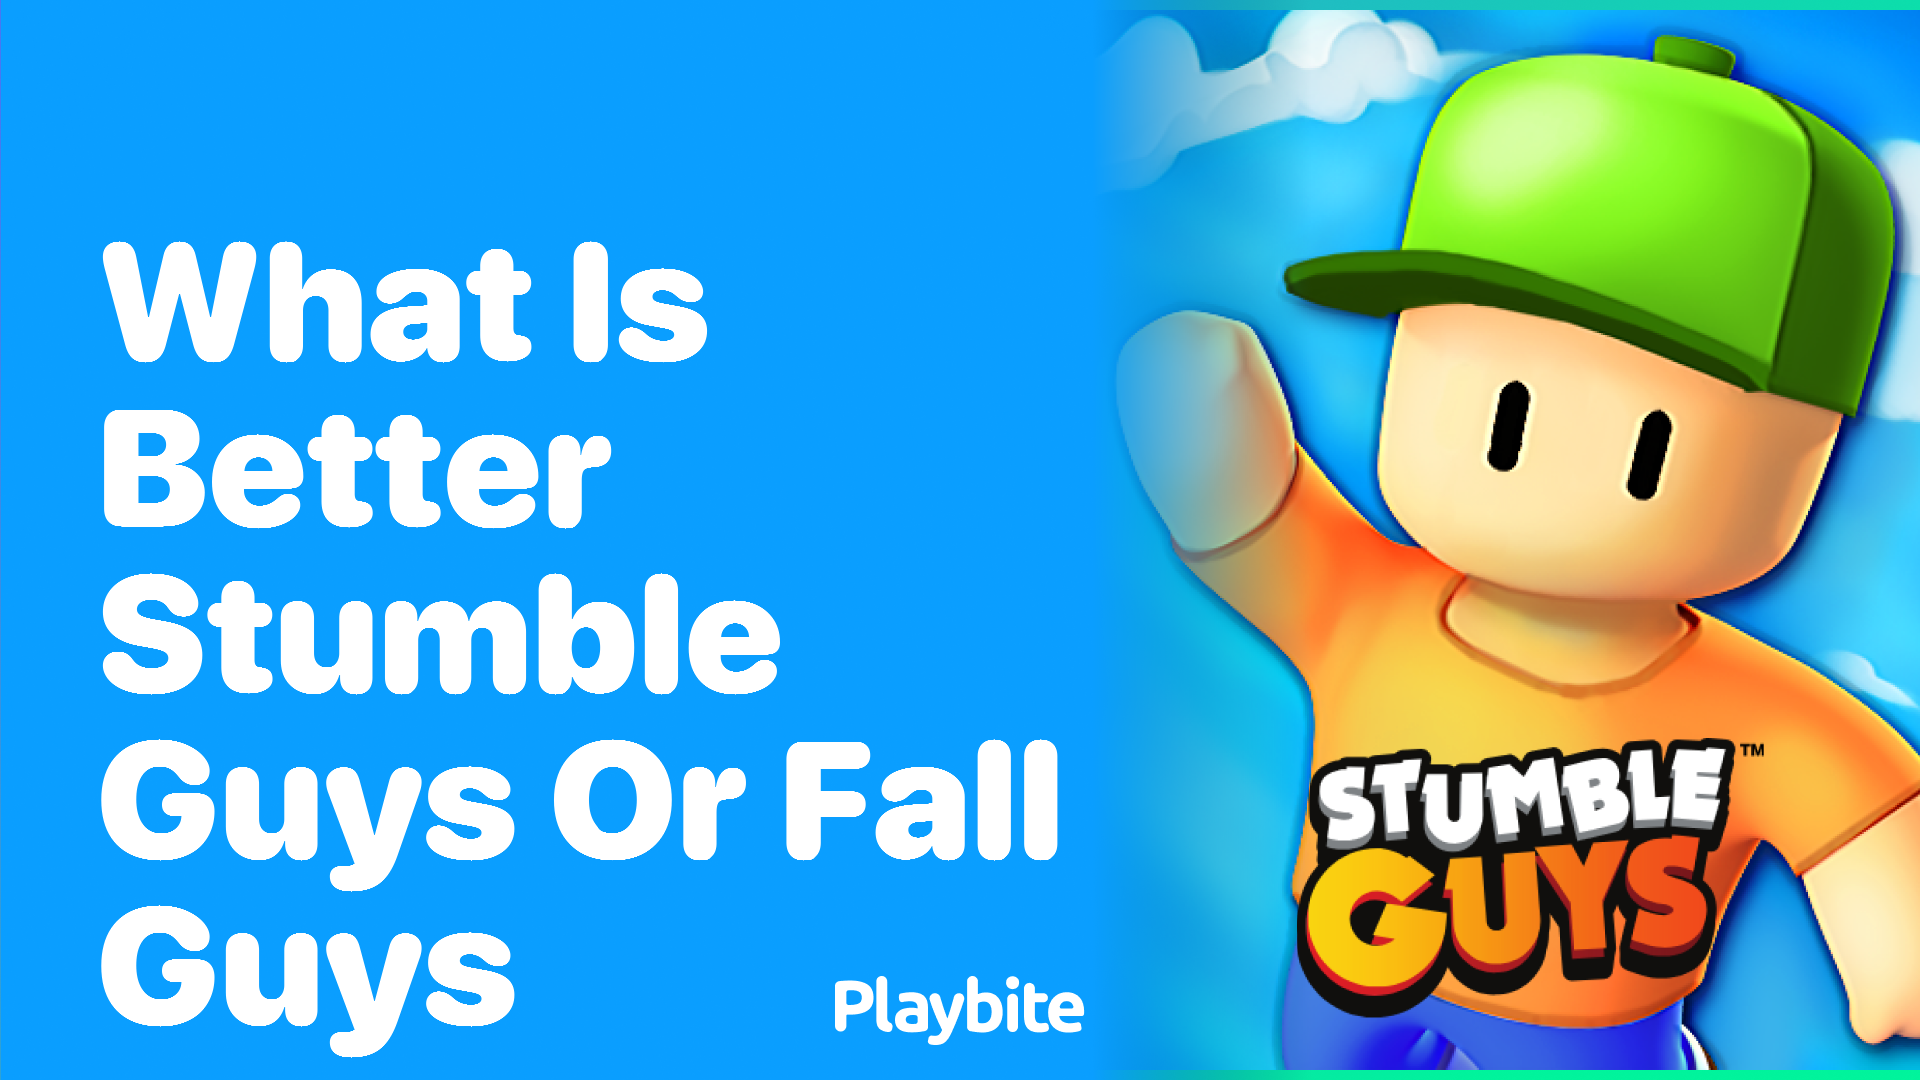 What Is Better: Stumble Guys or Fall Guys?